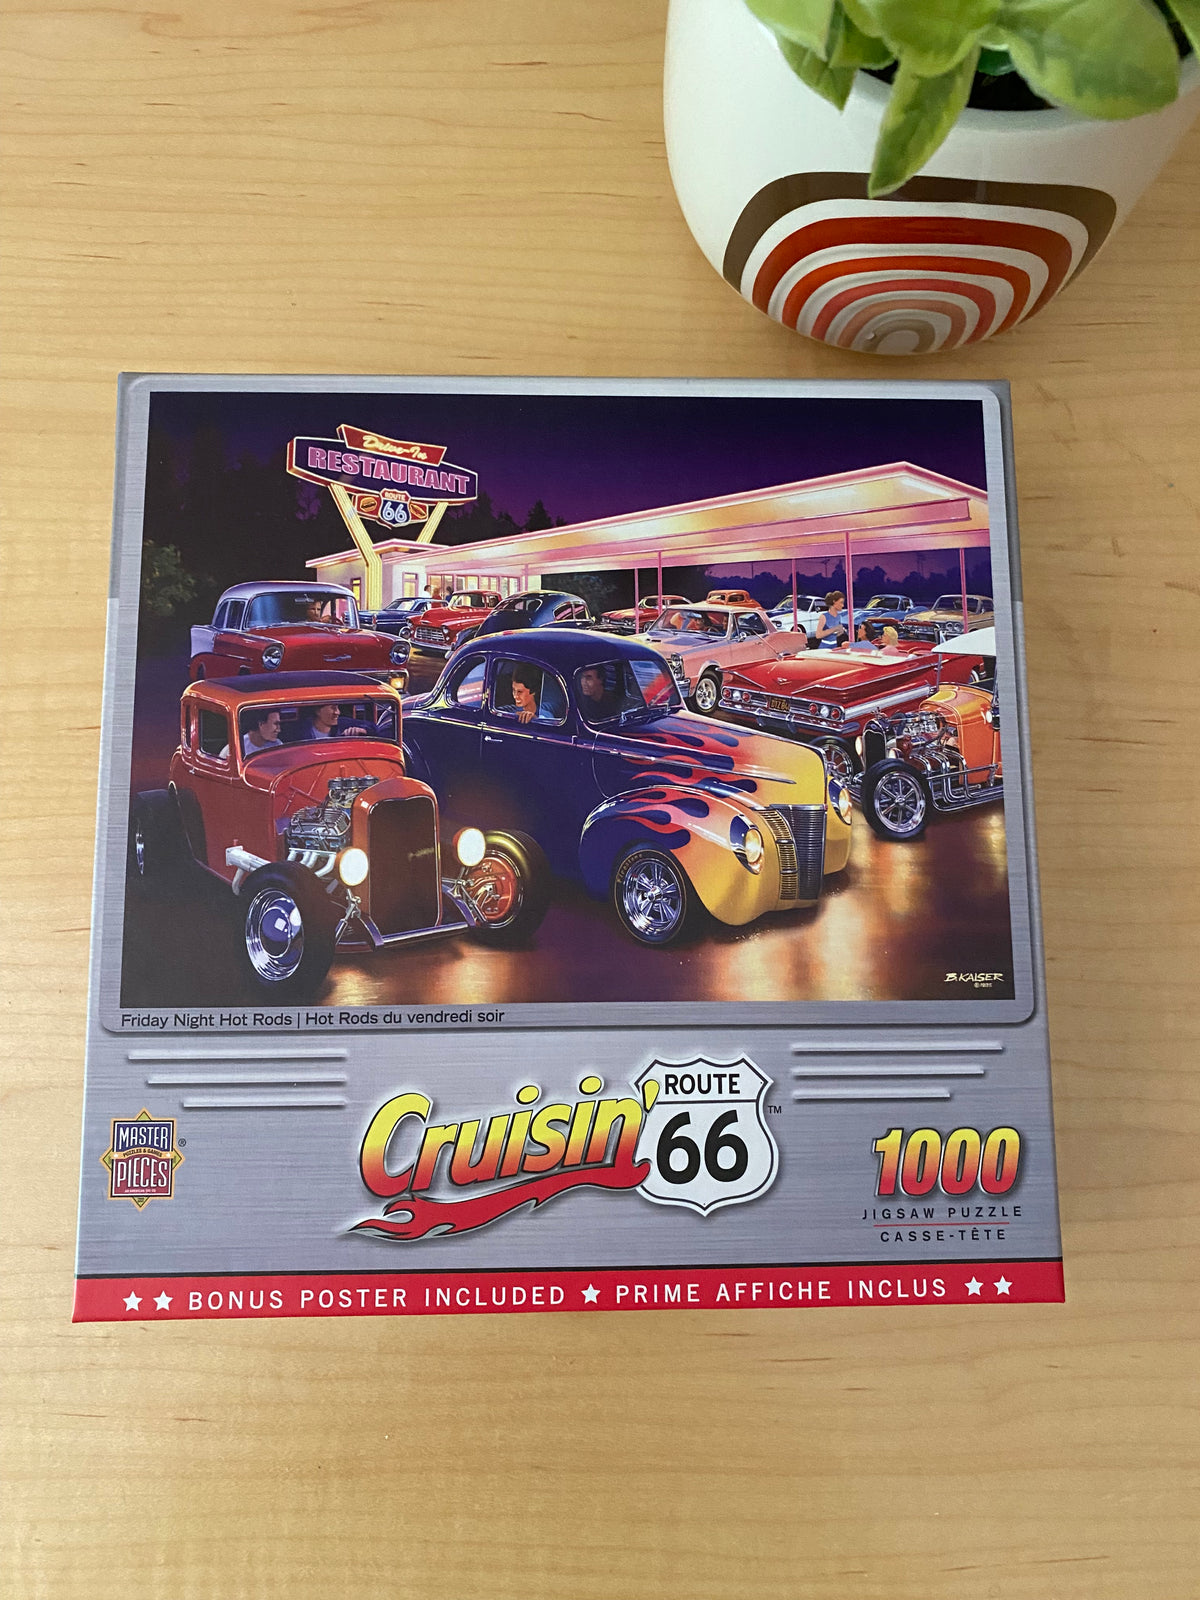 Friday Night Hot Rods Puzzle